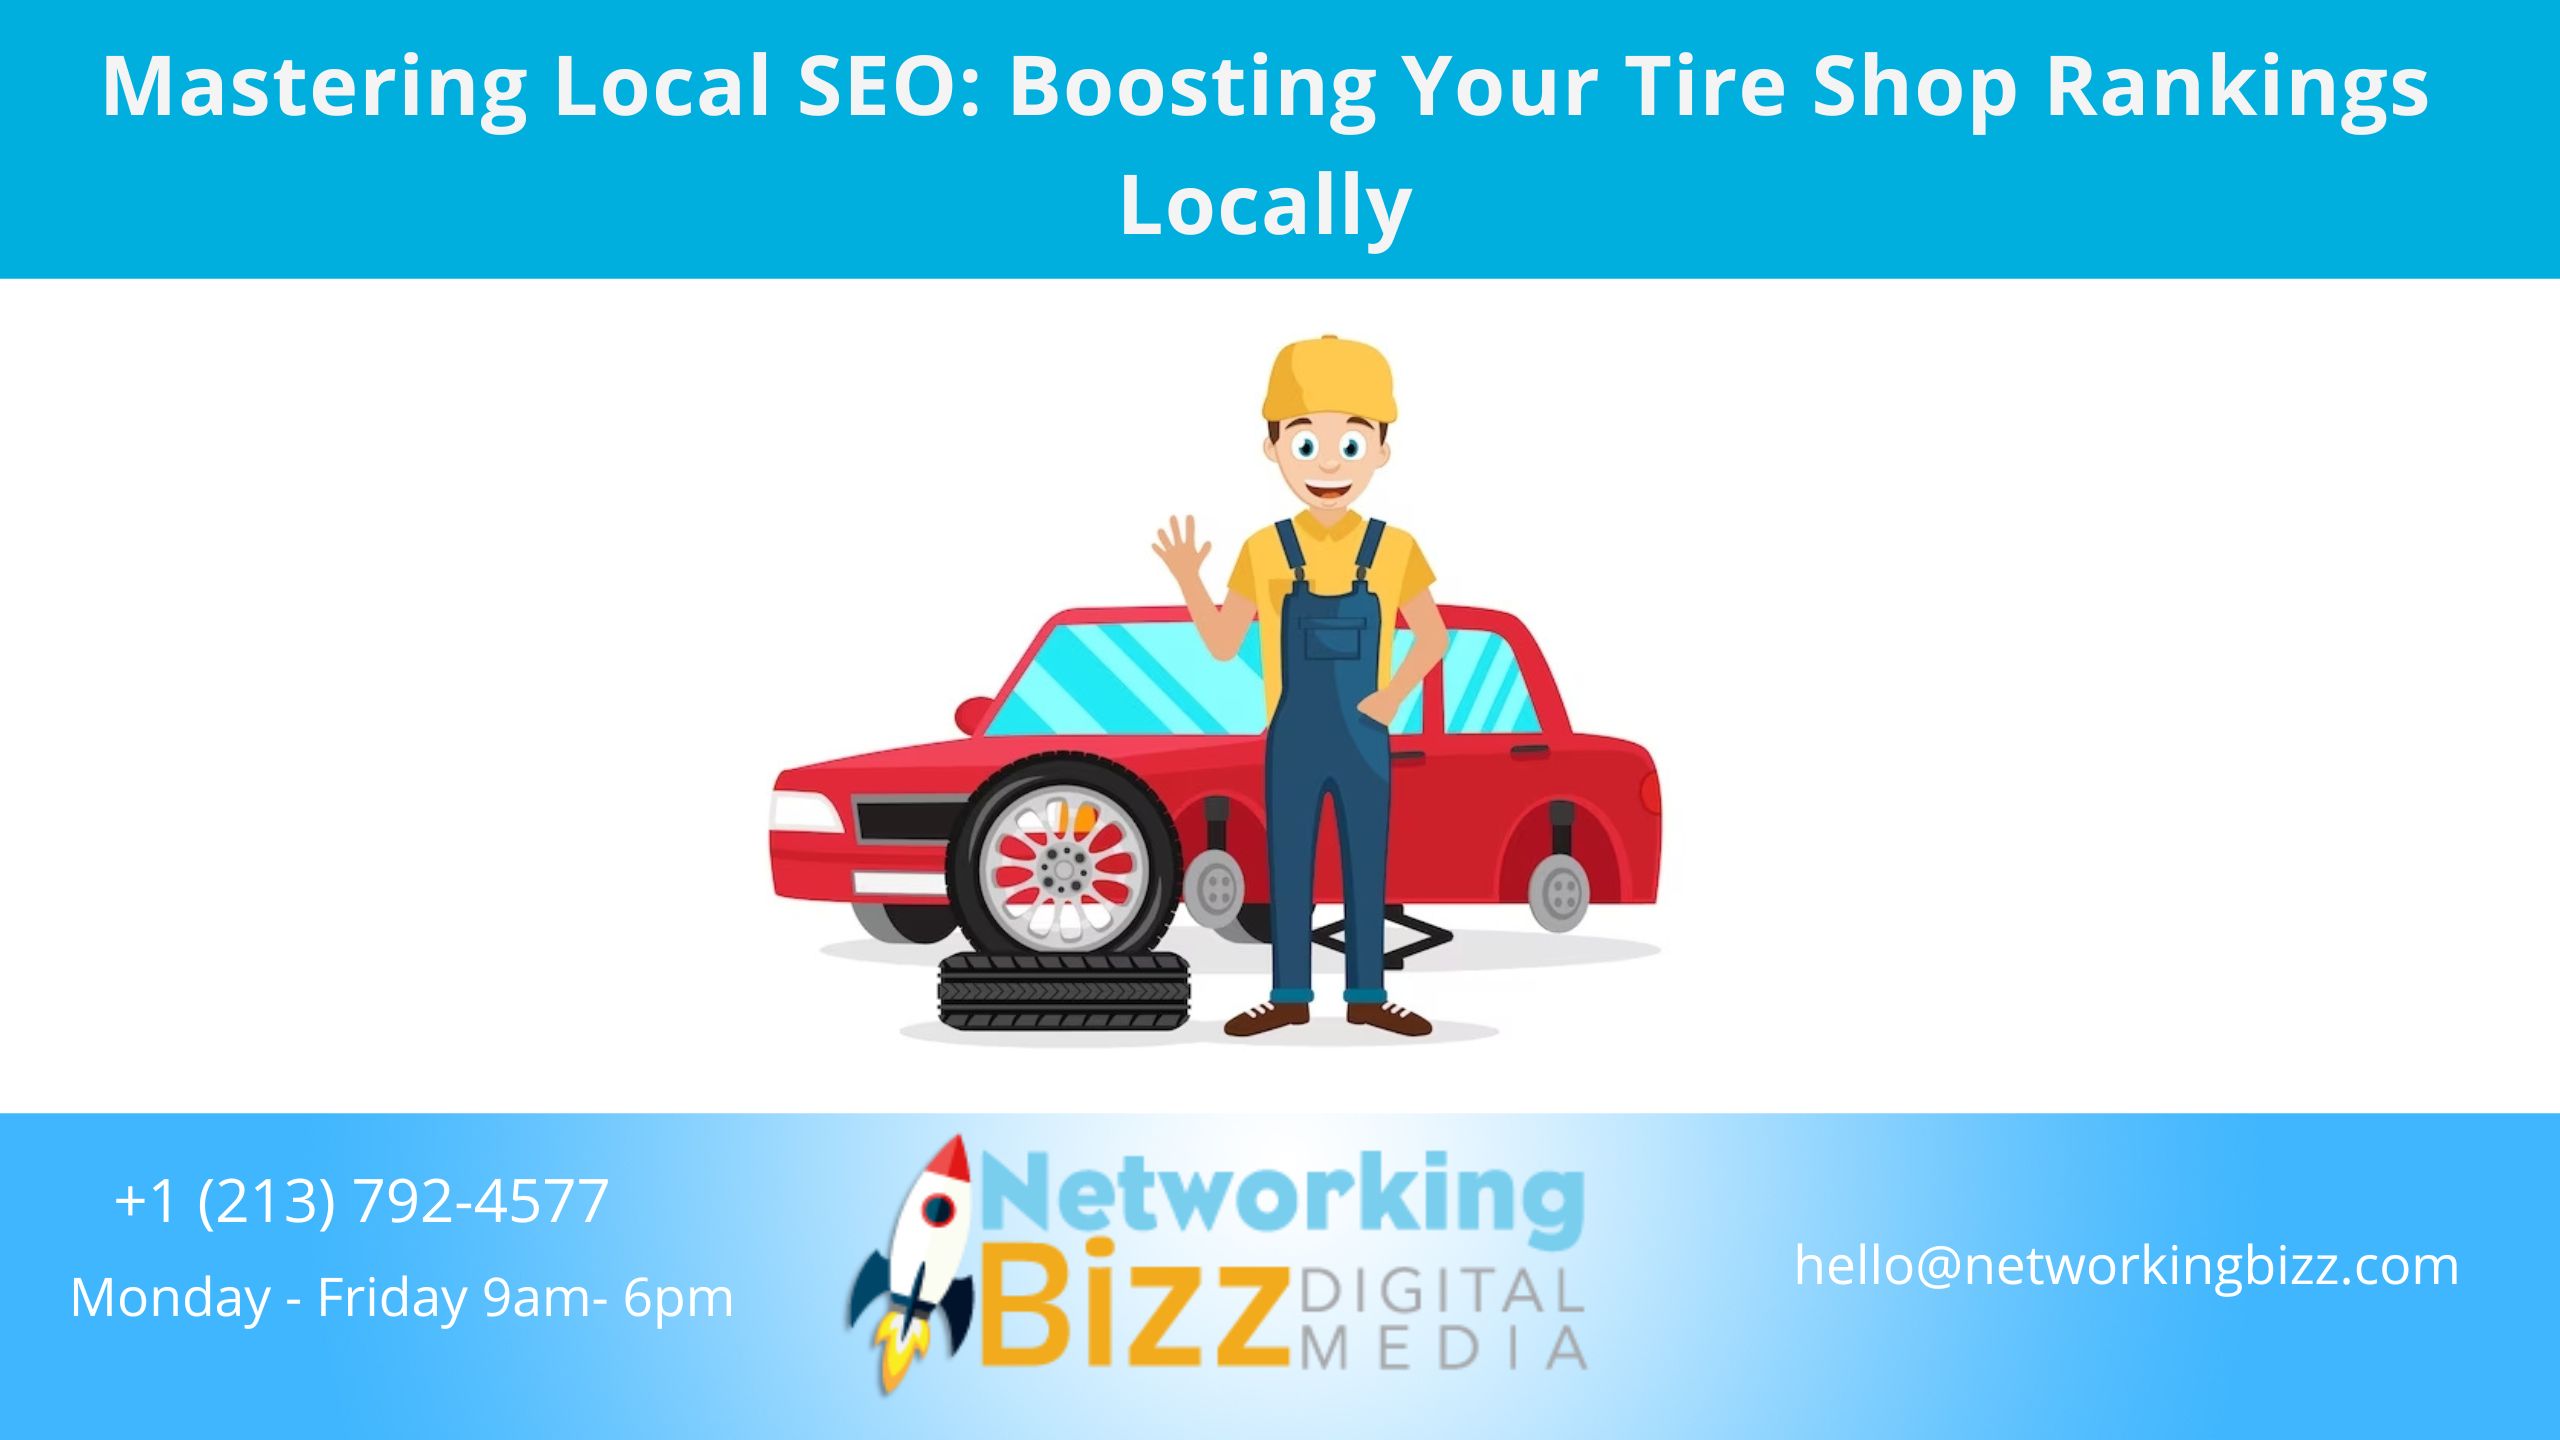 Mastering Local SEO: Boosting Your Tire Shop Rankings Locally